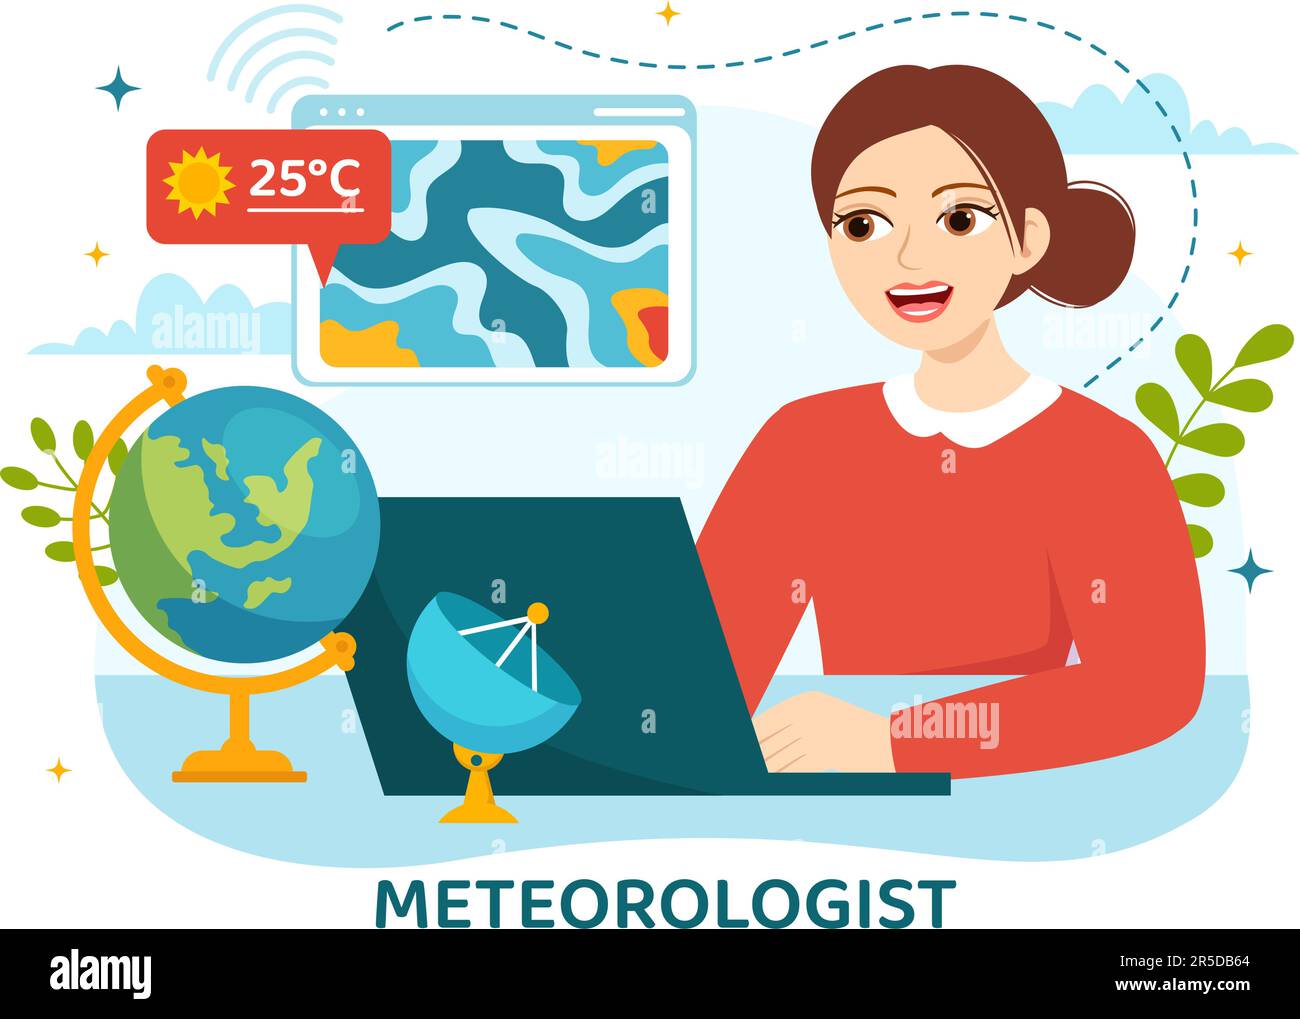 Meteorologist Vector Illustration with Weather Forecast and Atmospheric Precipitation Map in Flat Cartoon Hand Drawn Landing Page Templates Stock Vector